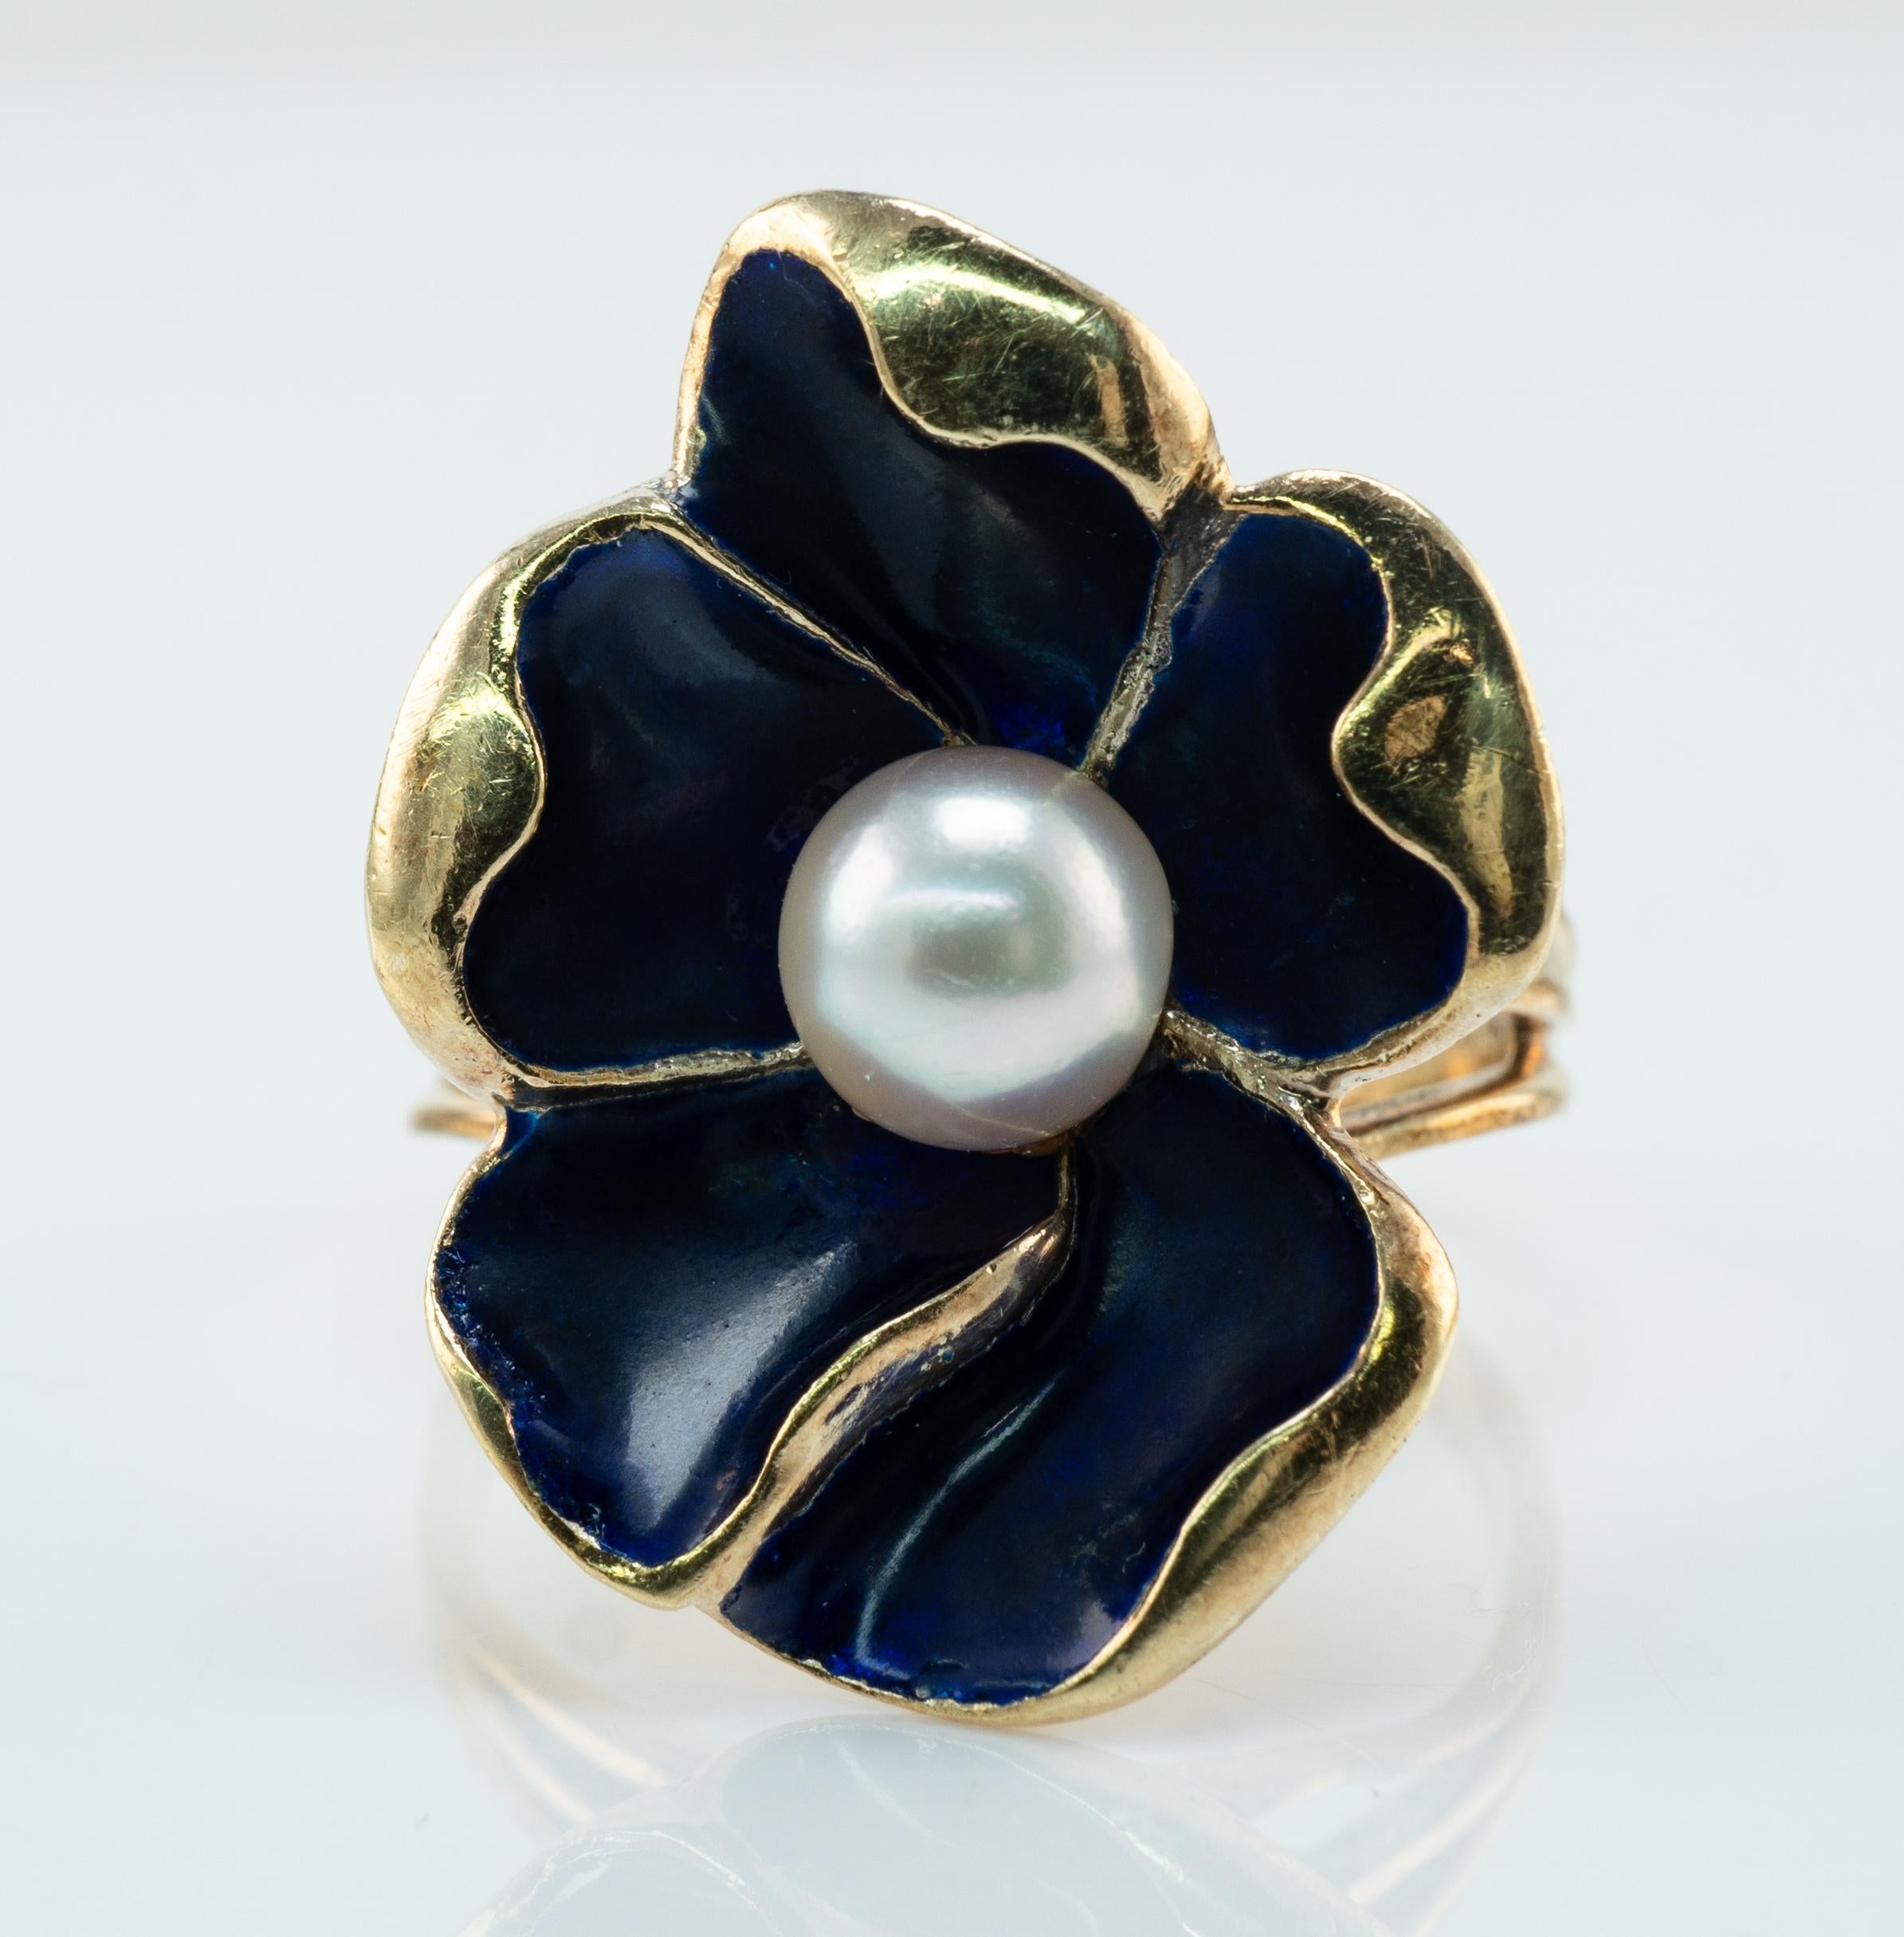 Blue Enamel Pearl Ring Flower 14K Gold Vintage

This pretty vintage ring is crafted in solid 14K gold. The natural cultured Pearl measures 7mm. The blue enamel on the petals is in good condition. The top of the ring measures 25mm x 20mm. The setting